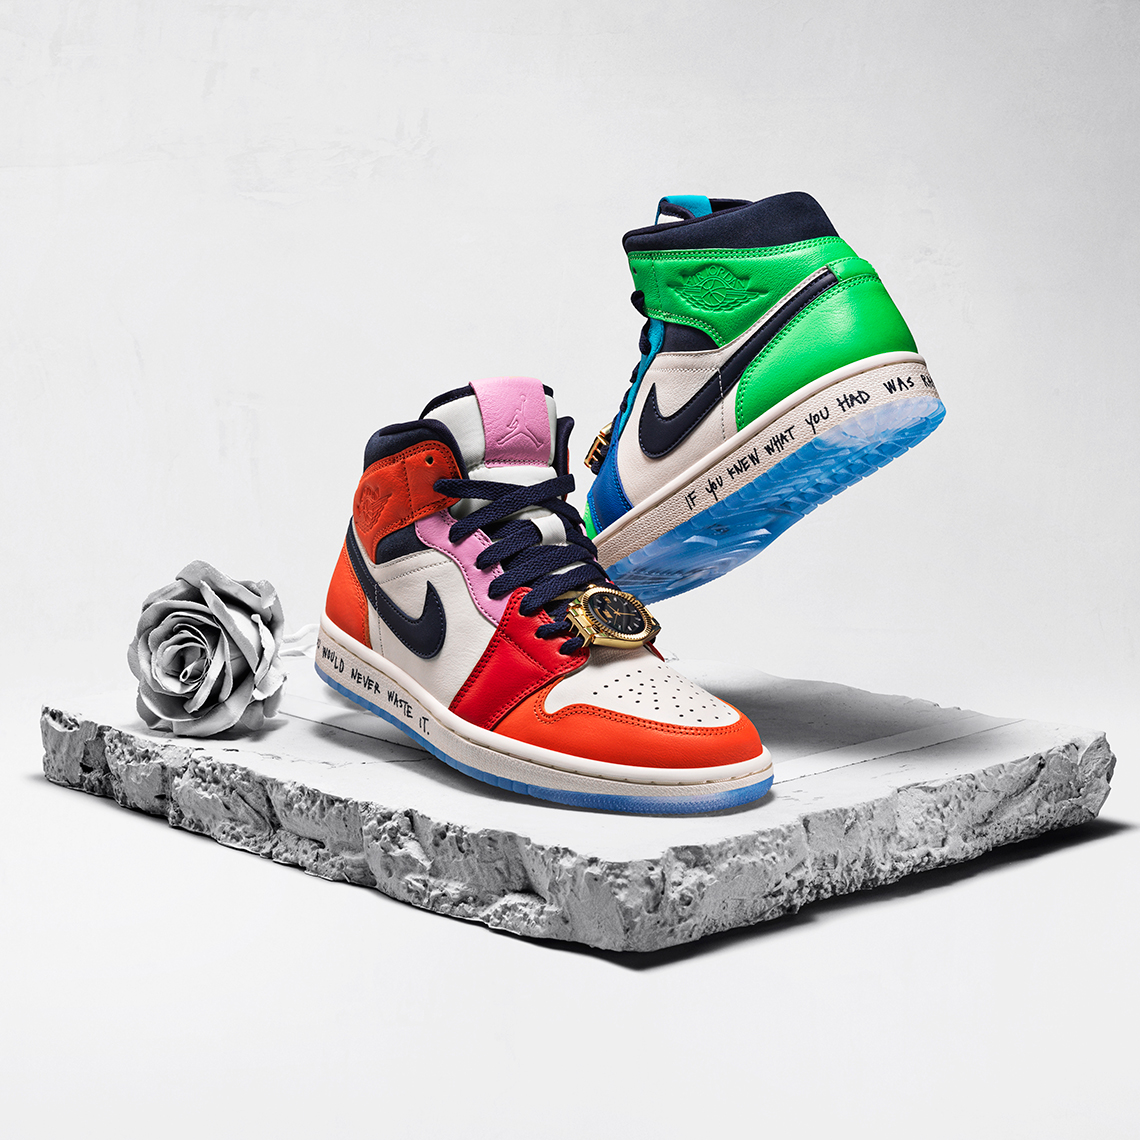 Jordan 1 Fearless Collection Release Dates | SneakerNews.com